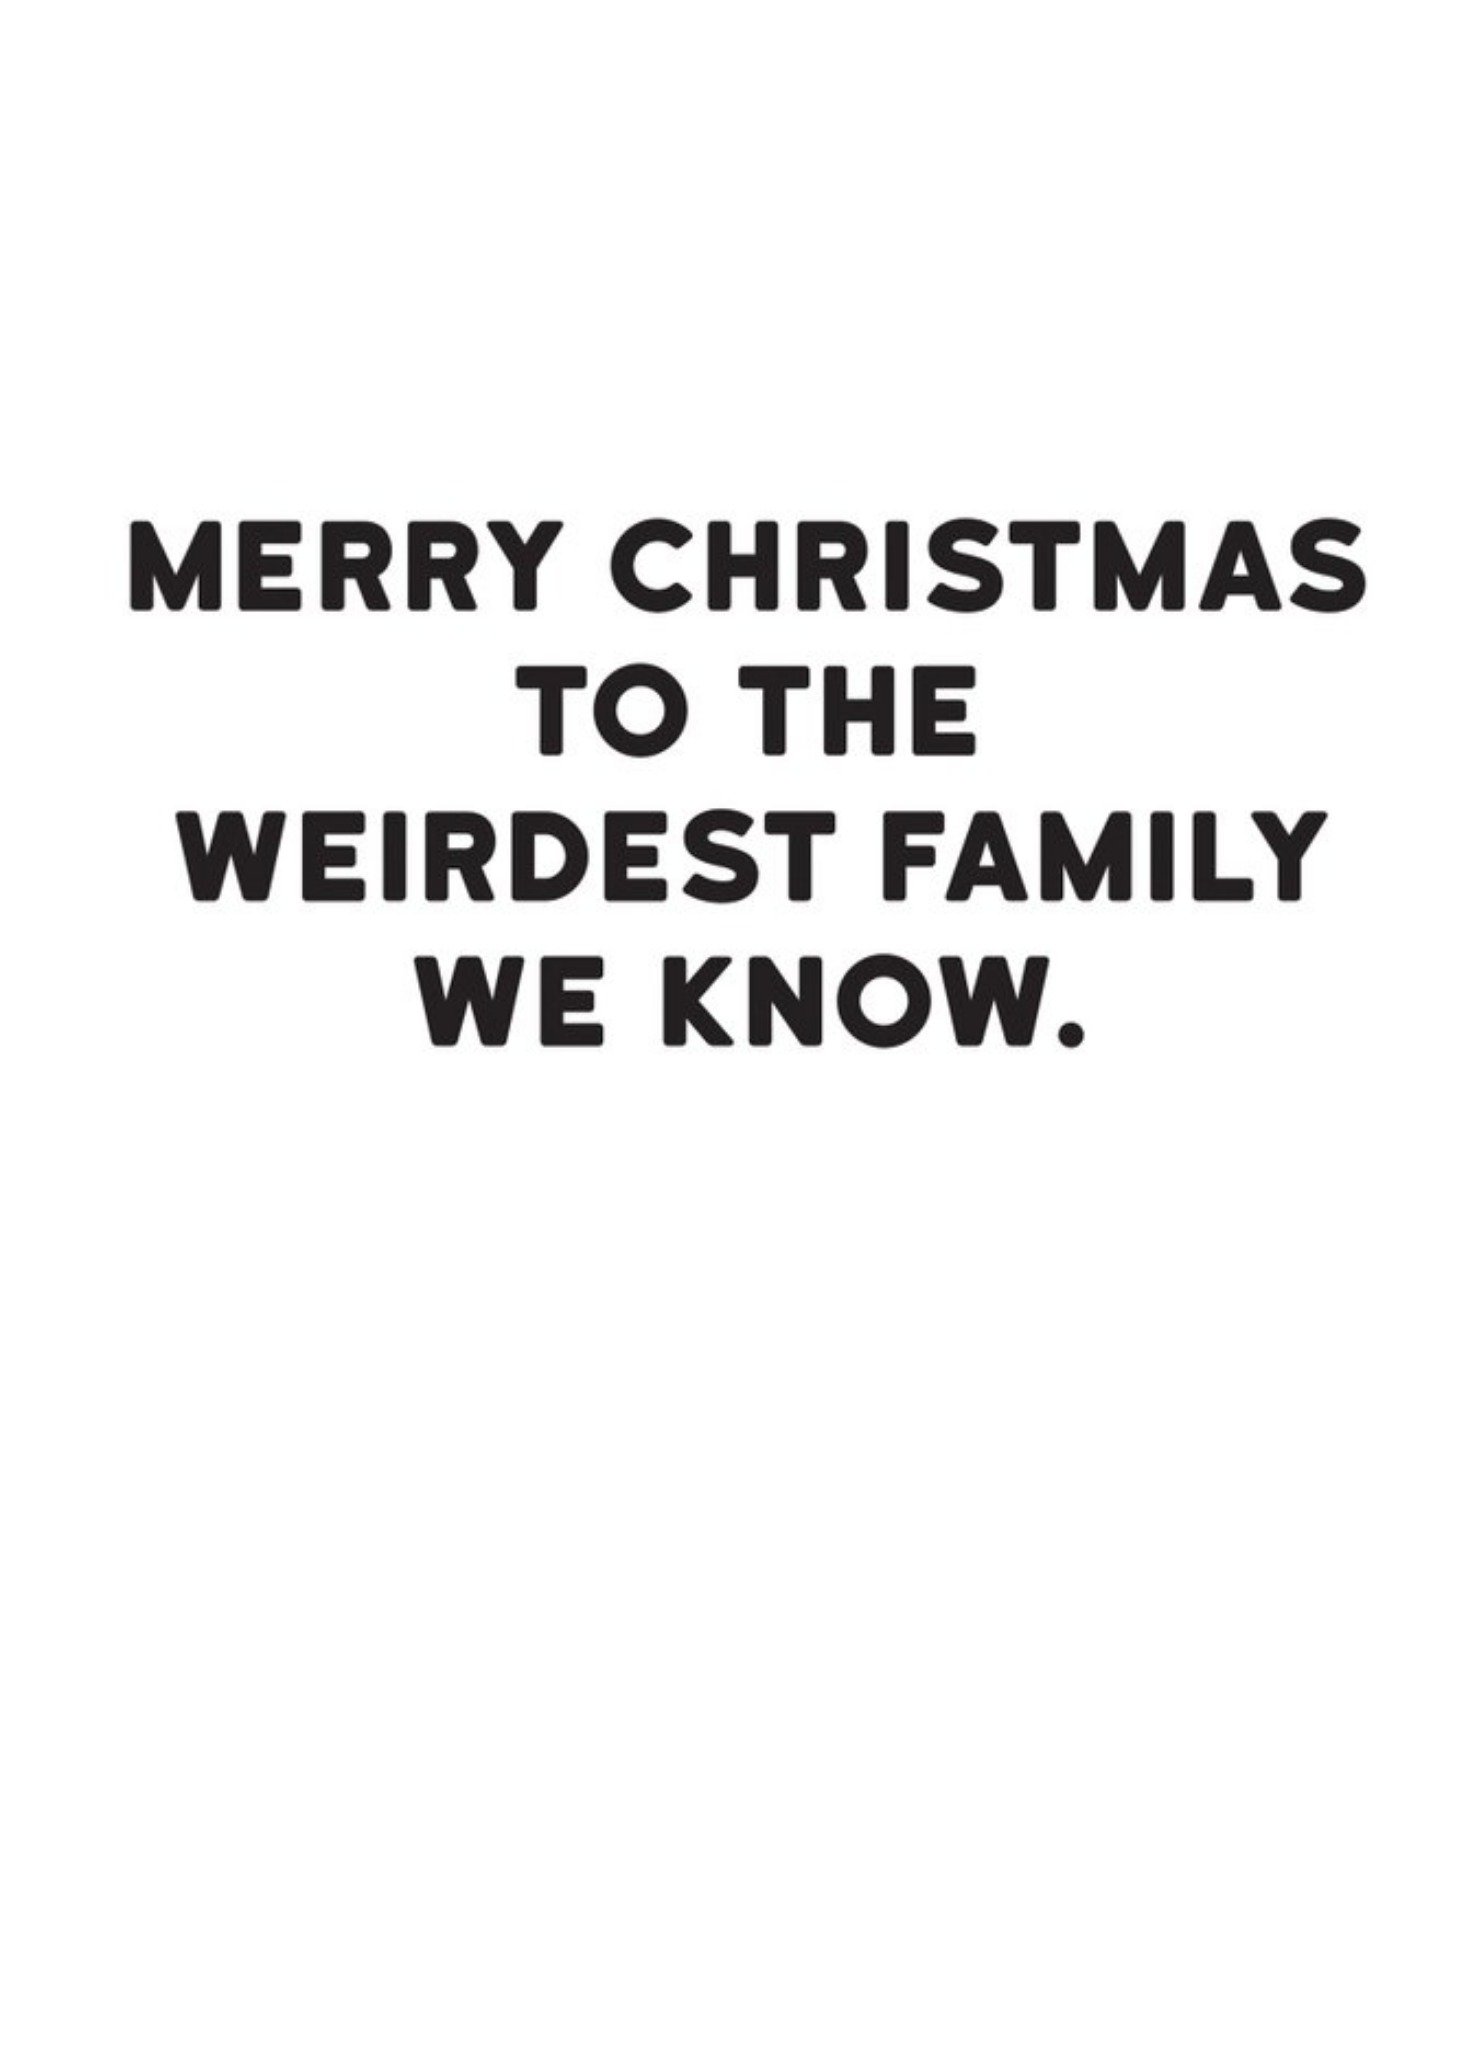 Moonpig Modern Funny Typographical The Weirdest Family We Know Christmas Card, Large